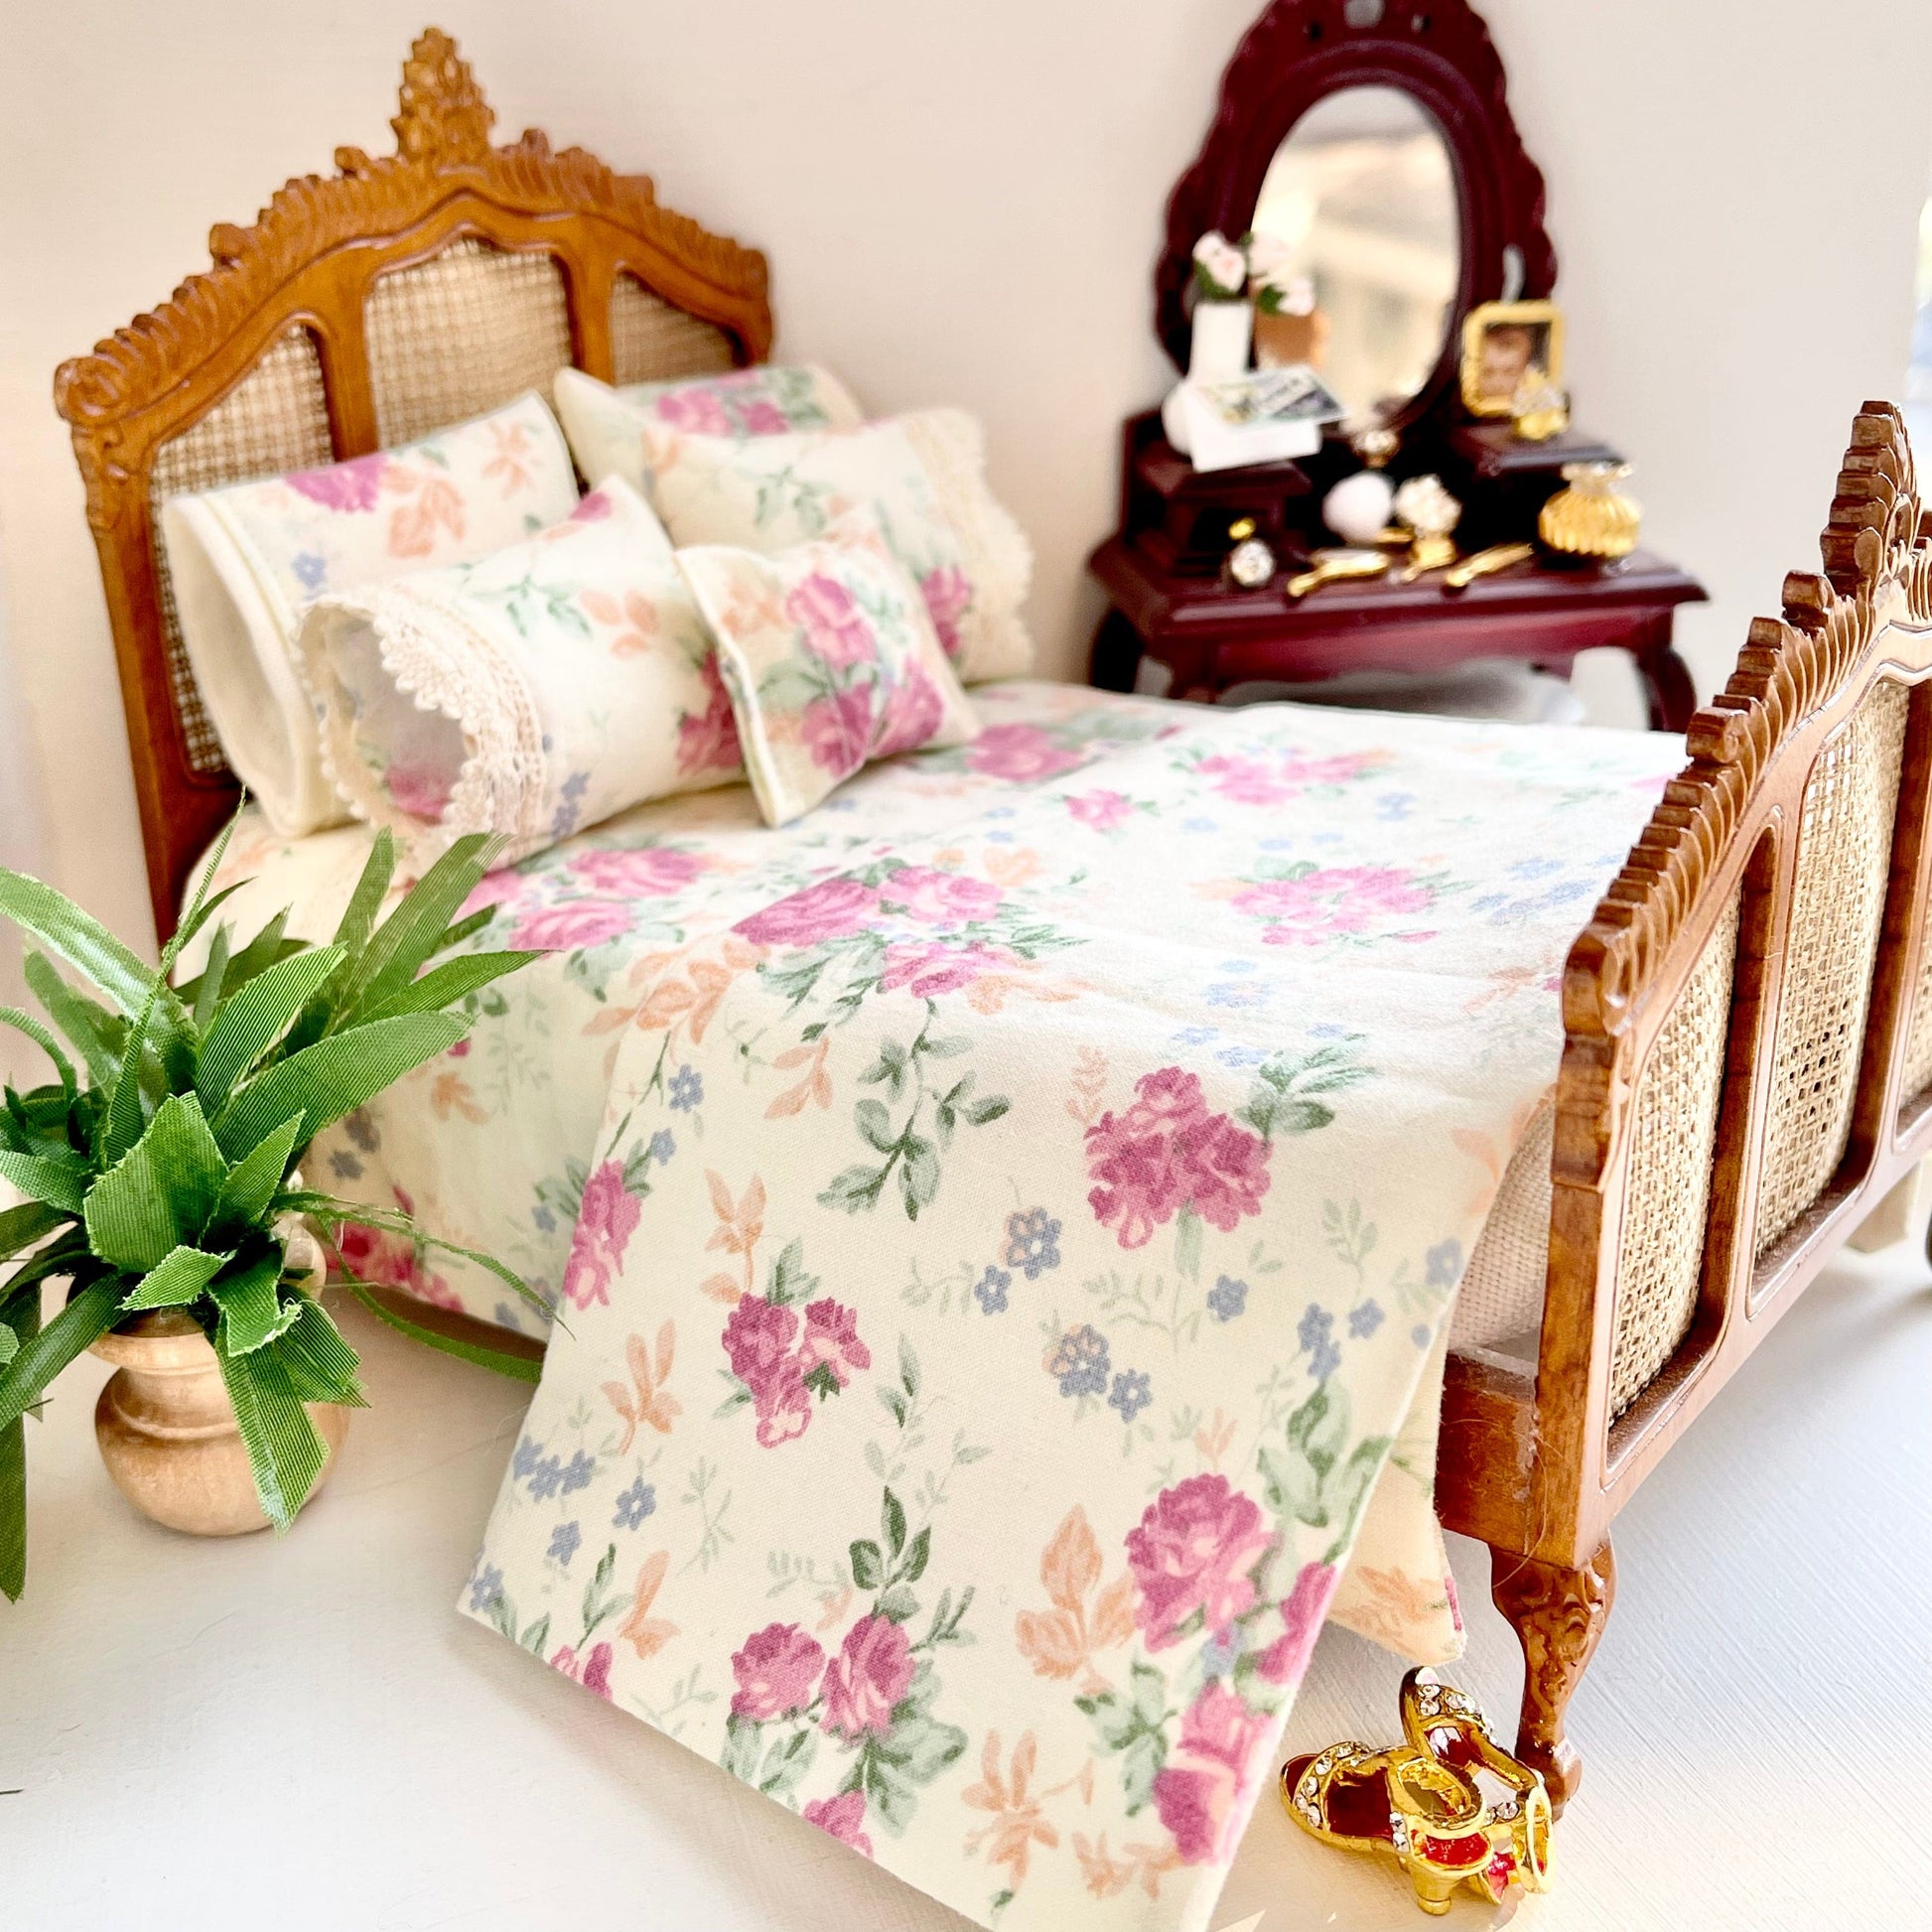 Chantallena Dollhouse Accessories double Country Weekend | Pale Yellow and Red Roses Cotton Bedding Set 1:12 Scale | Kaylyn